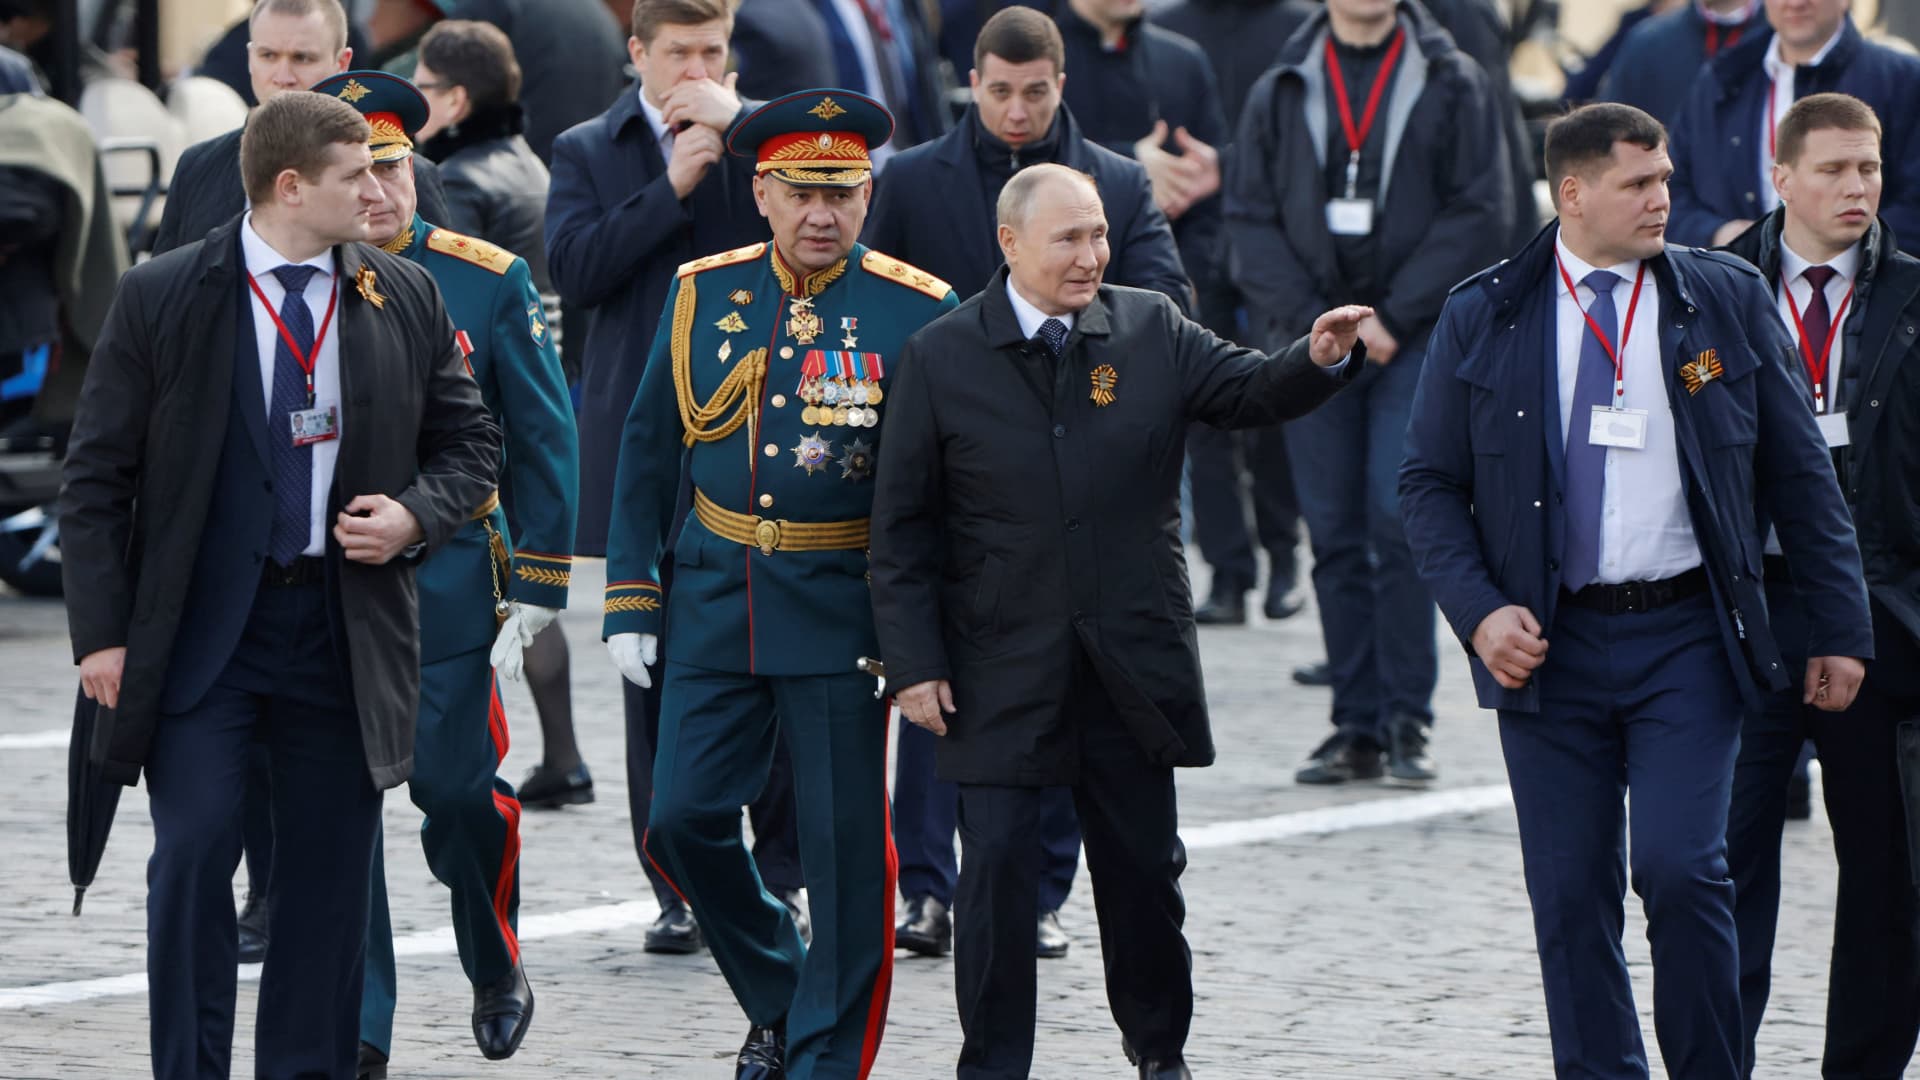 Russian President Vladimir Putin and Defence Minister Sergei Shoigu walk after a military parade on Victory Day, which marks the 77th anniversary of the victory over Nazi Germany in World War Two, in Red Square in central Moscow, Russia May 9, 2022. 